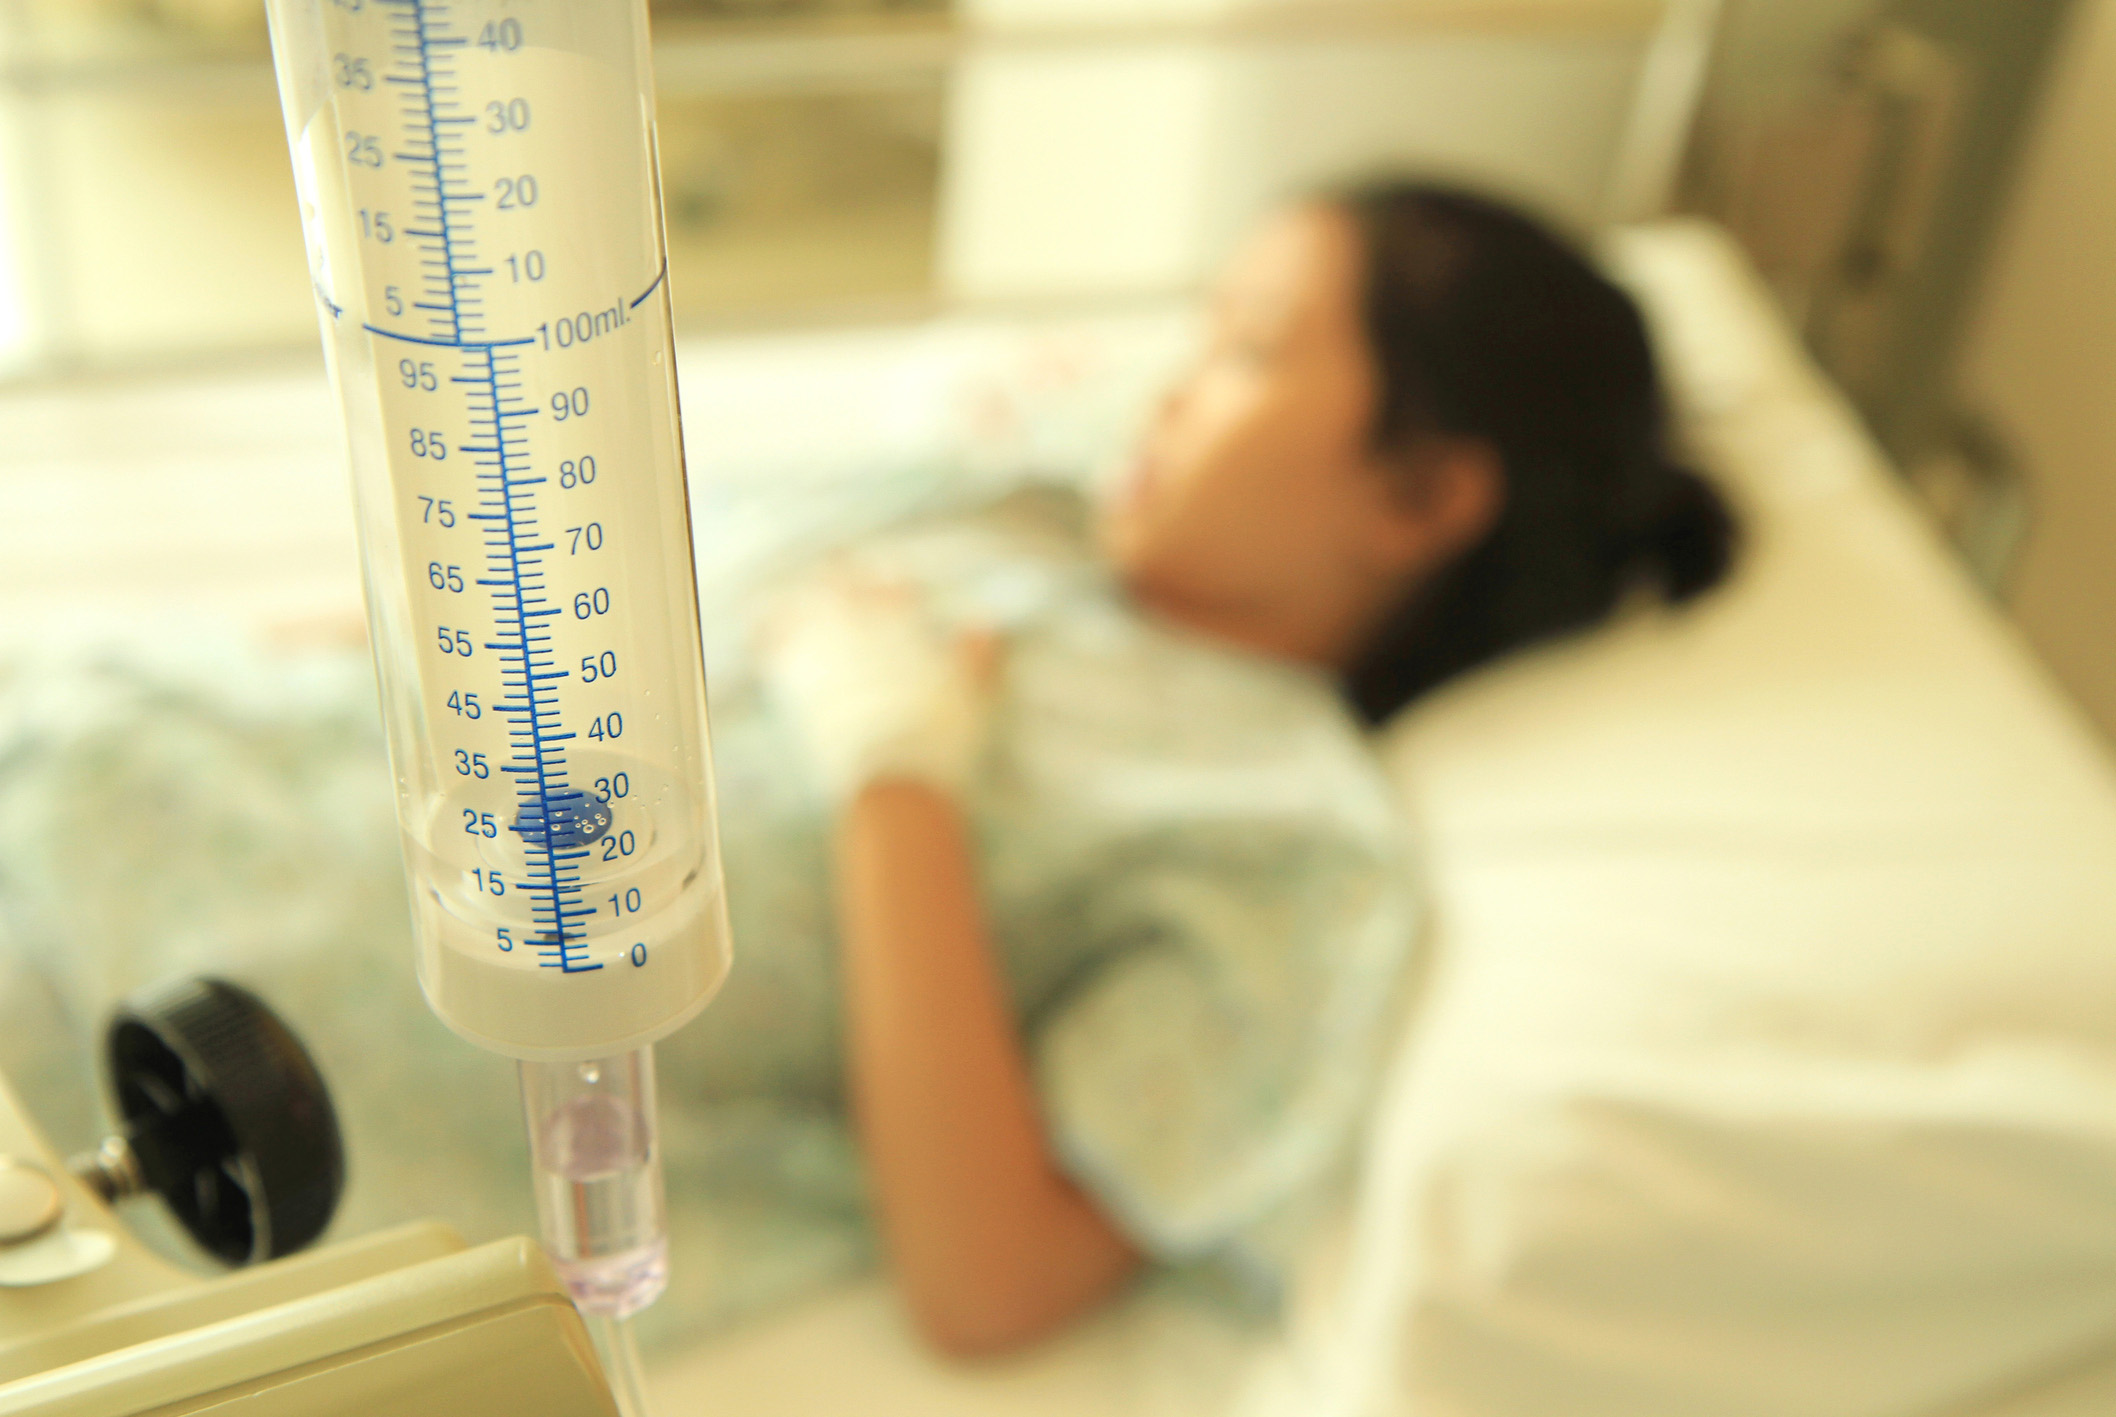 Patient on hospital bed with saline solution tube